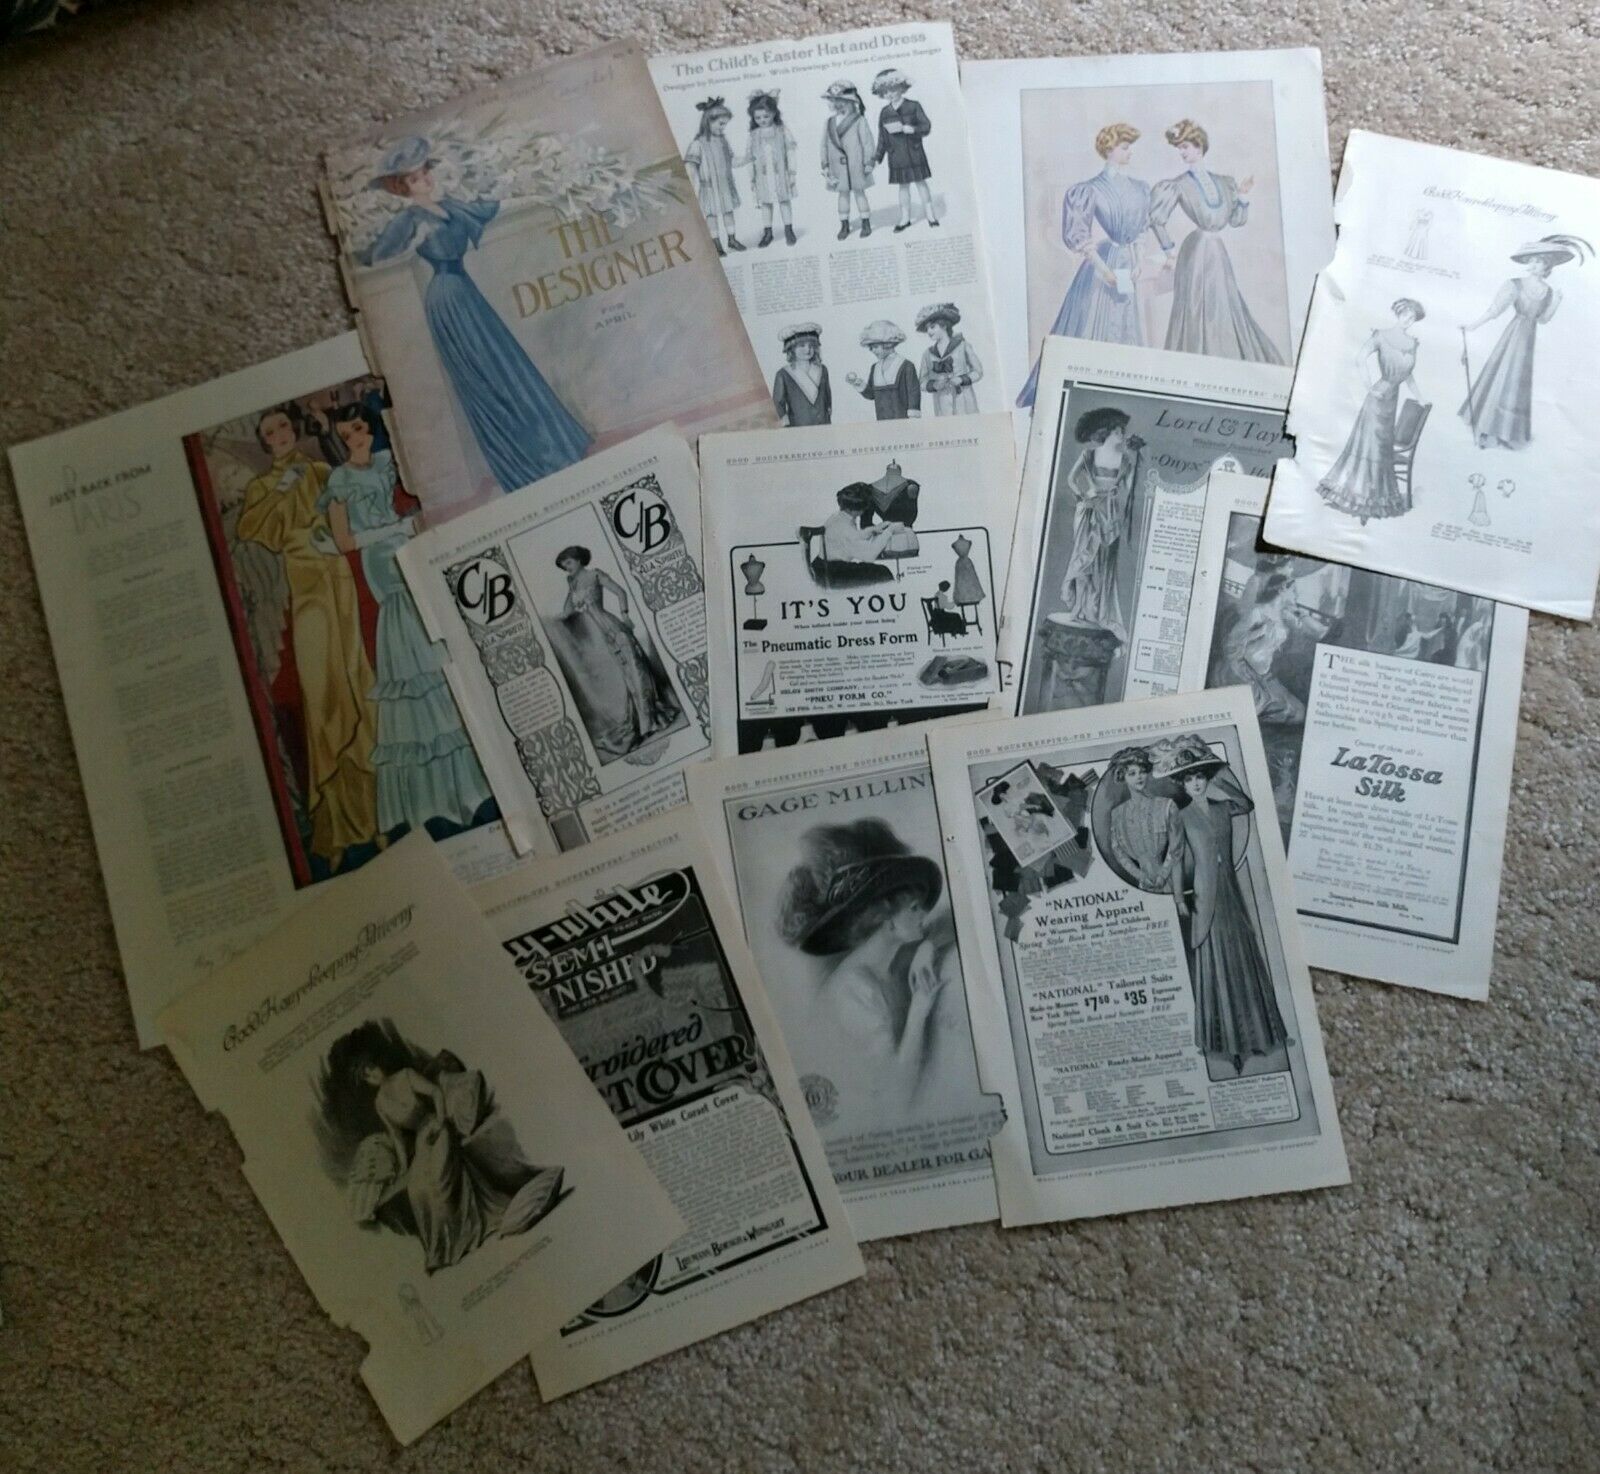 Lot 24 Vintage Women's Clothing Magazine Advertising Print Ads Early 1900s-1930s